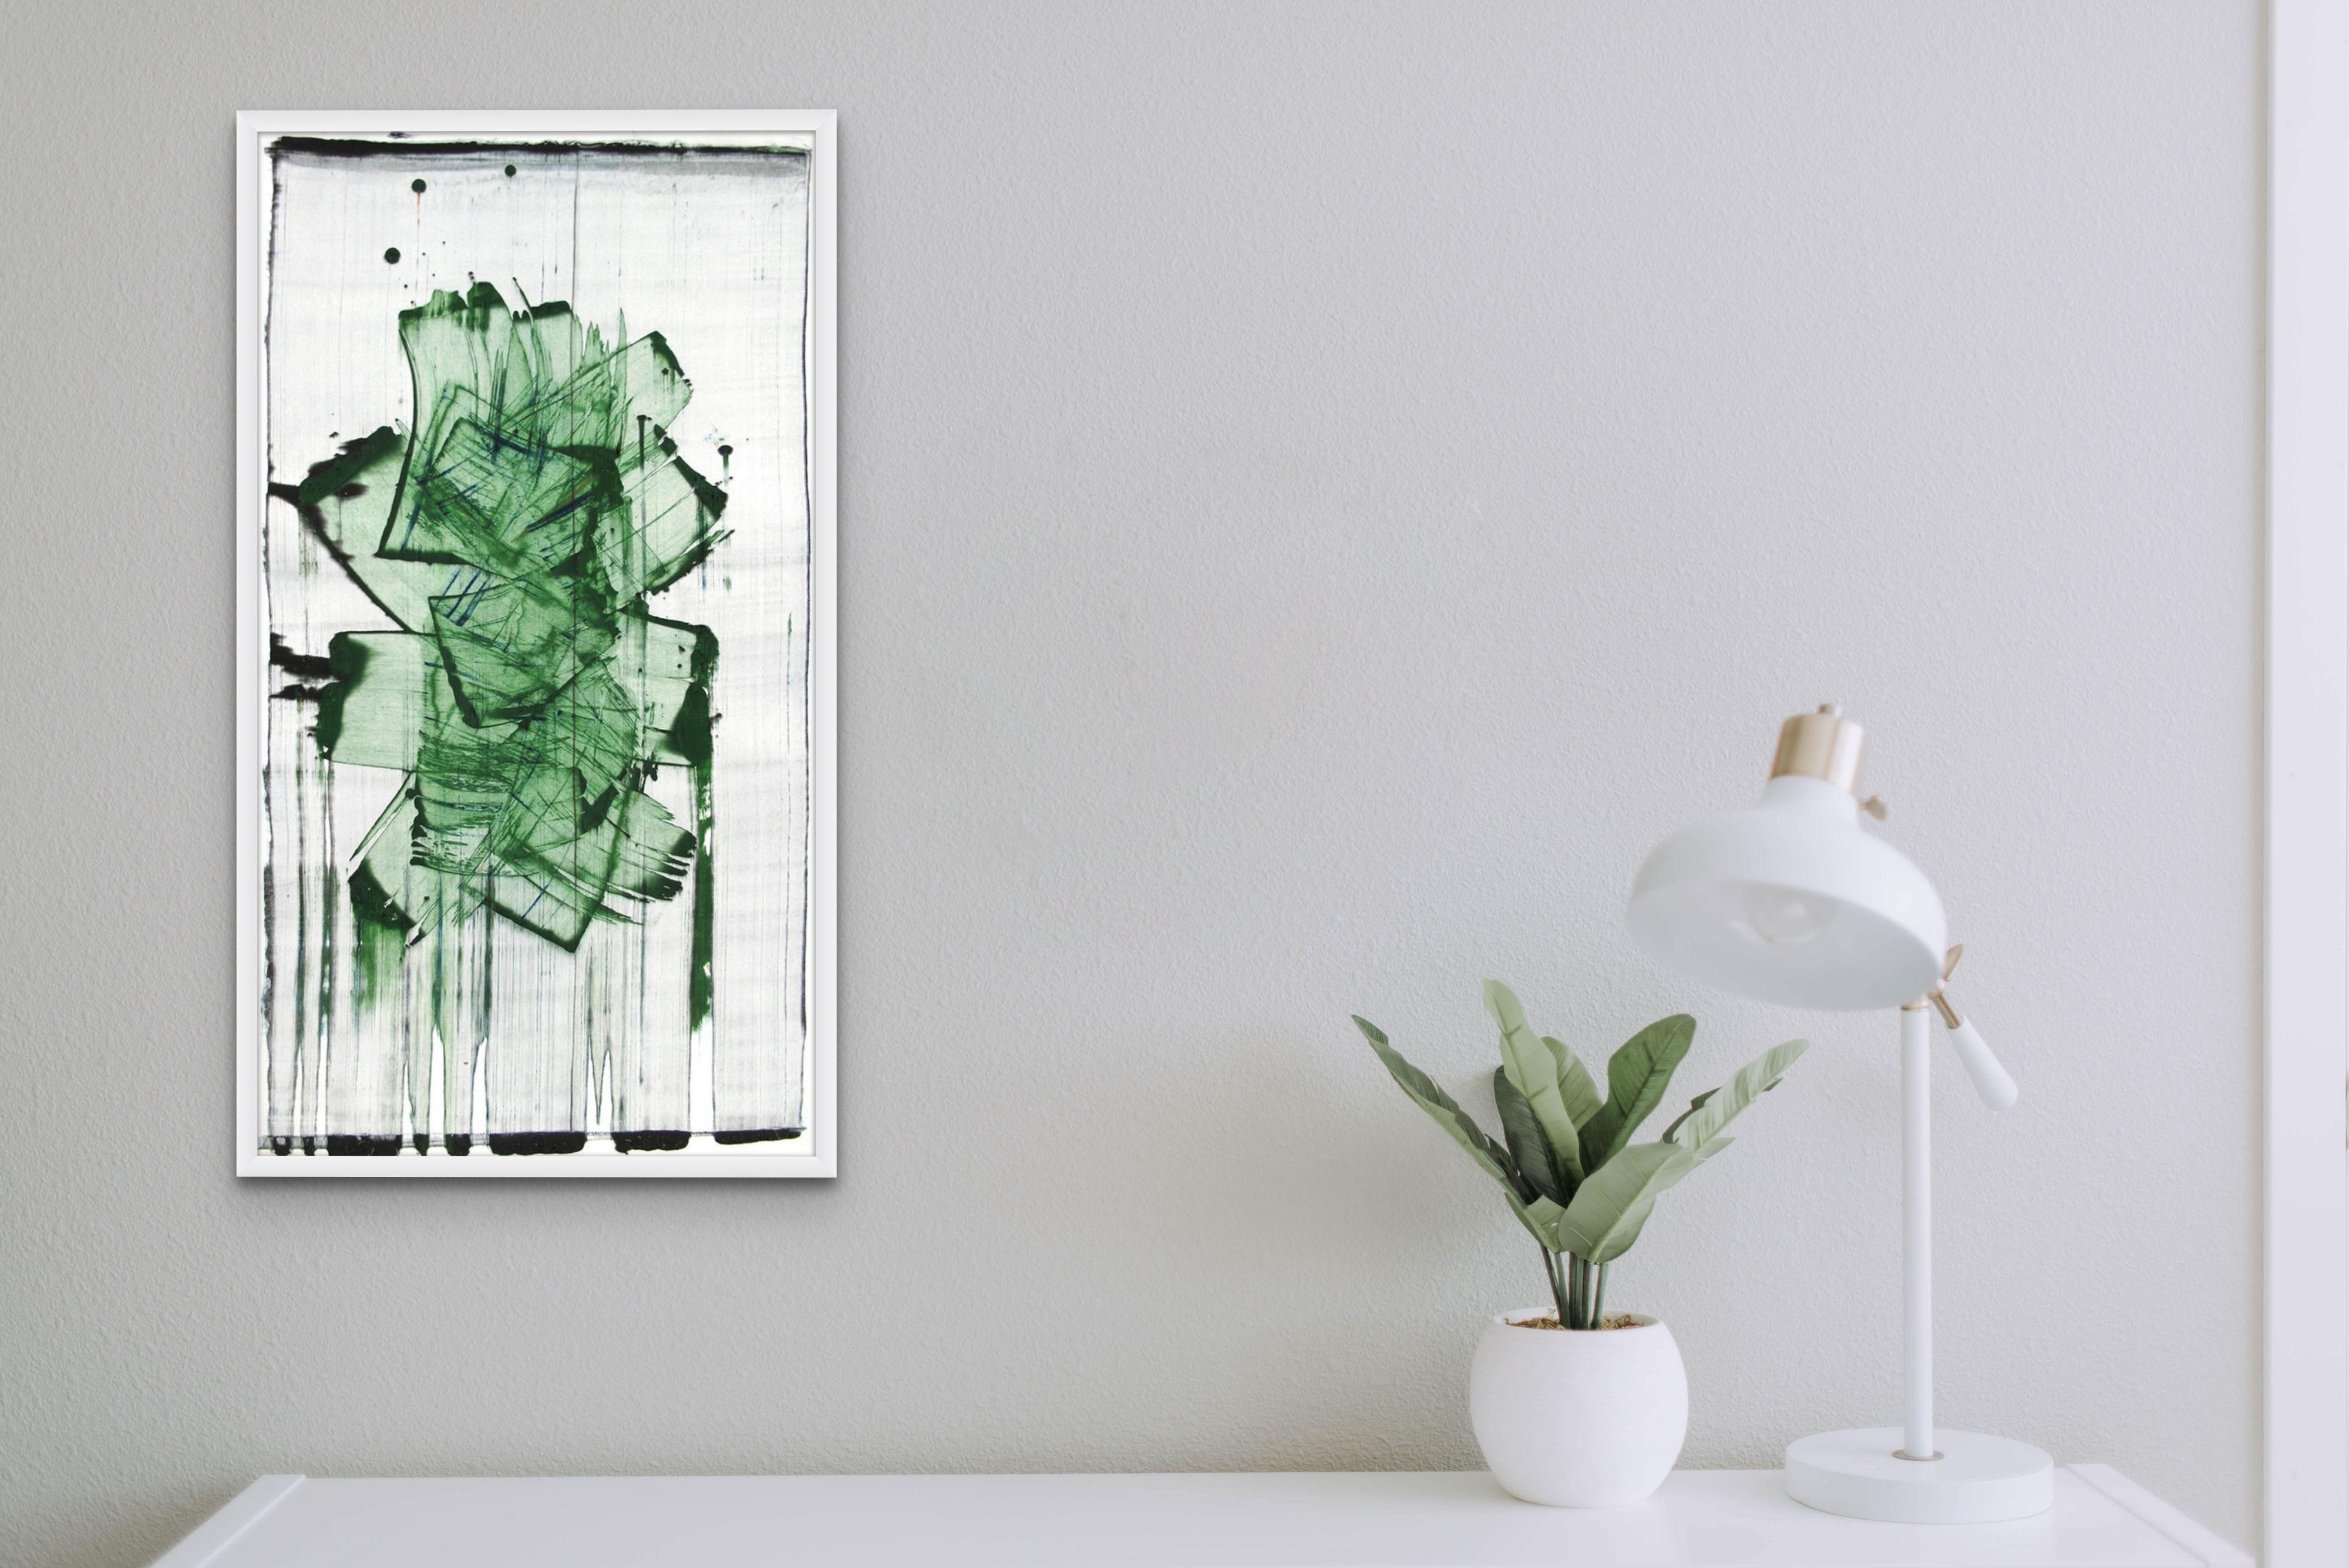 Mad green 10 (Abstract Painting) - Art by Emma Godebska